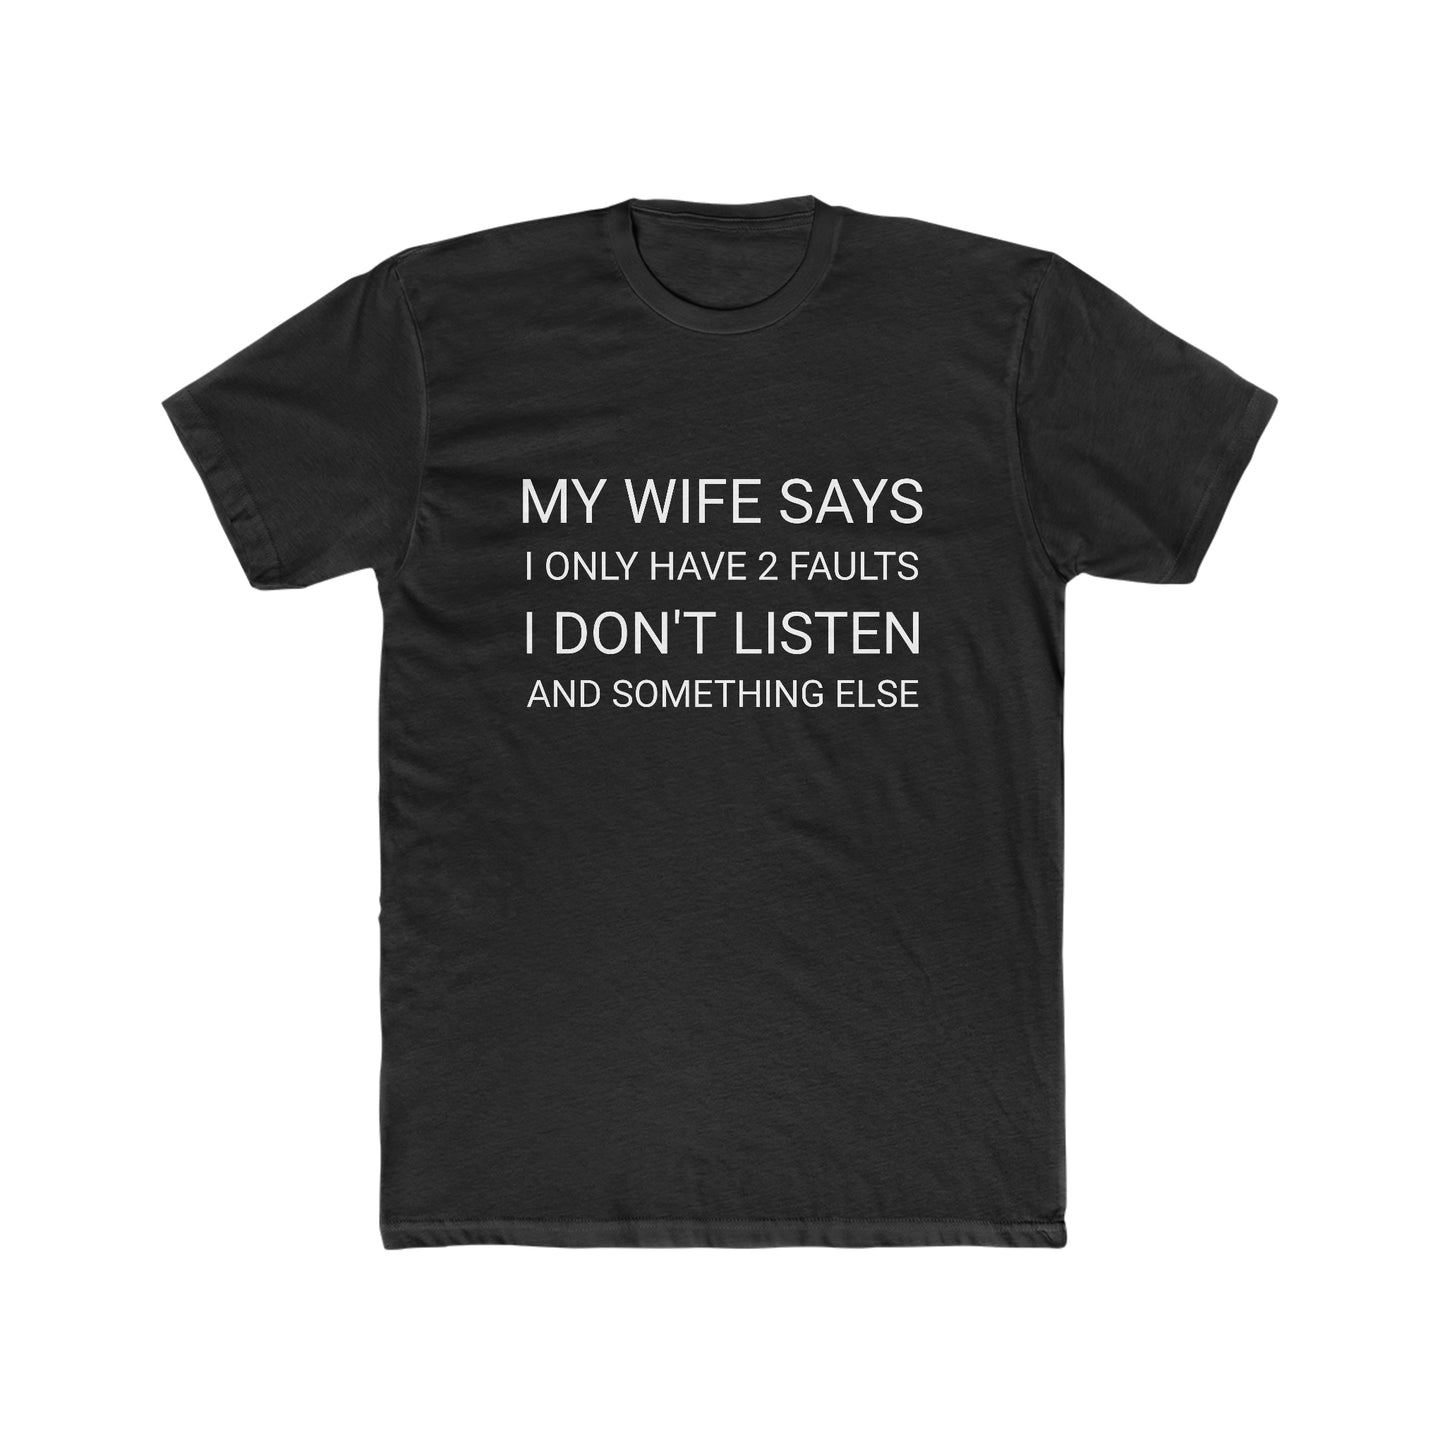 My Wife Says I Only Have 2 Faults Men's Cotton Crew Tee